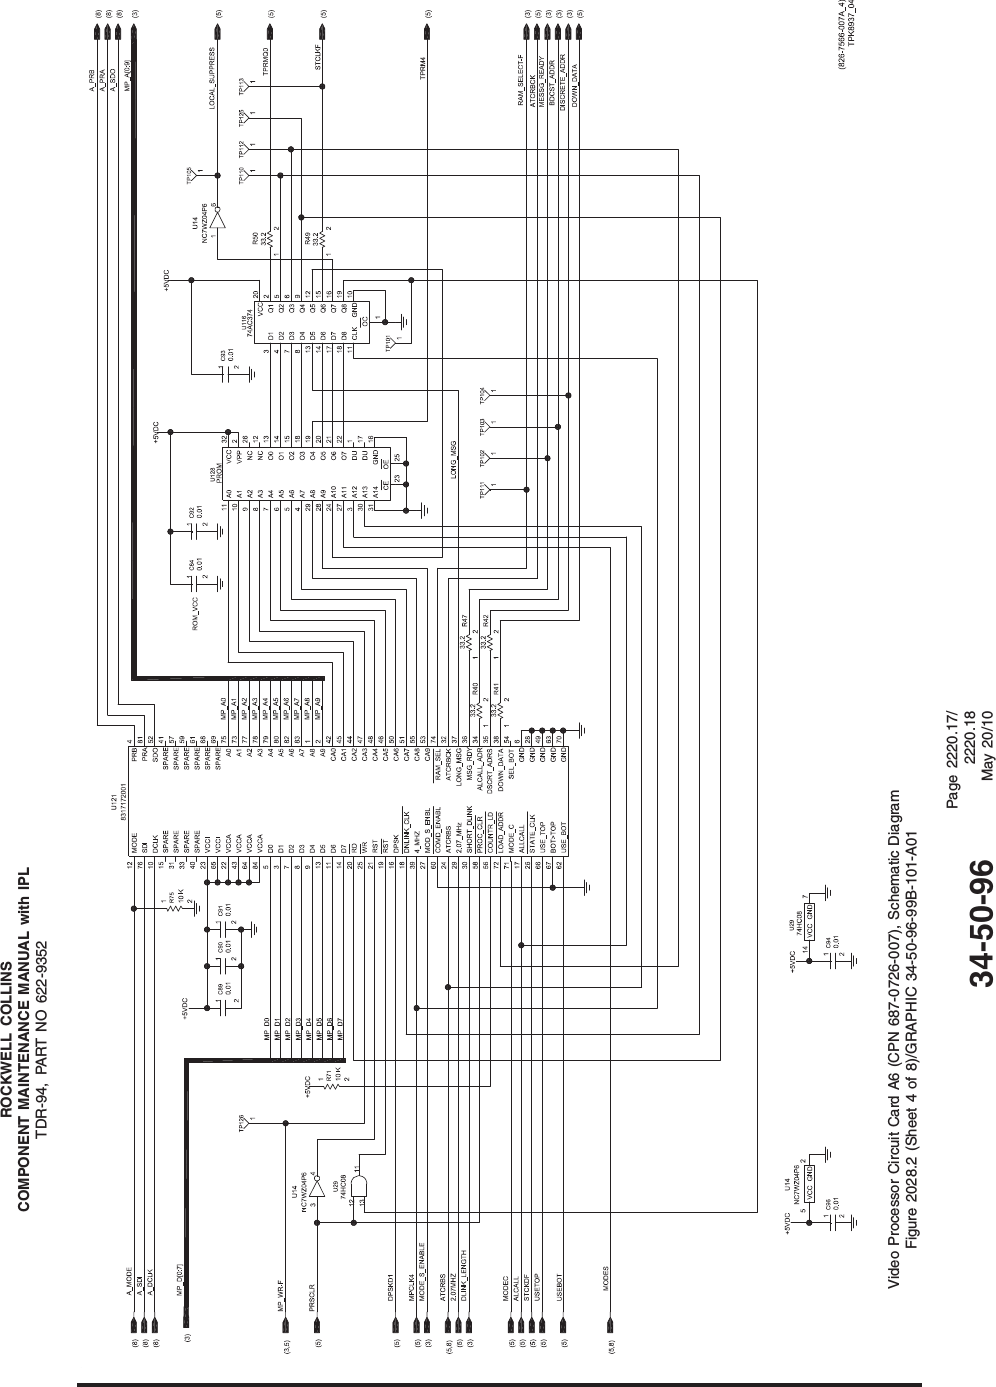 ROCKWELL COLLINSCOMPONENT MAINTENANCE MANUAL with IPLTDR-94, PART NO 622-9352Video Processor Circuit Card A6 (CPN 687-0726-007), Schematic DiagramFigure 2028.2 (Sheet 4 of 8)/GRAPHIC 34-50-96-99B-101-A0134-50-96Page 2220.17/2220.18May 20/10